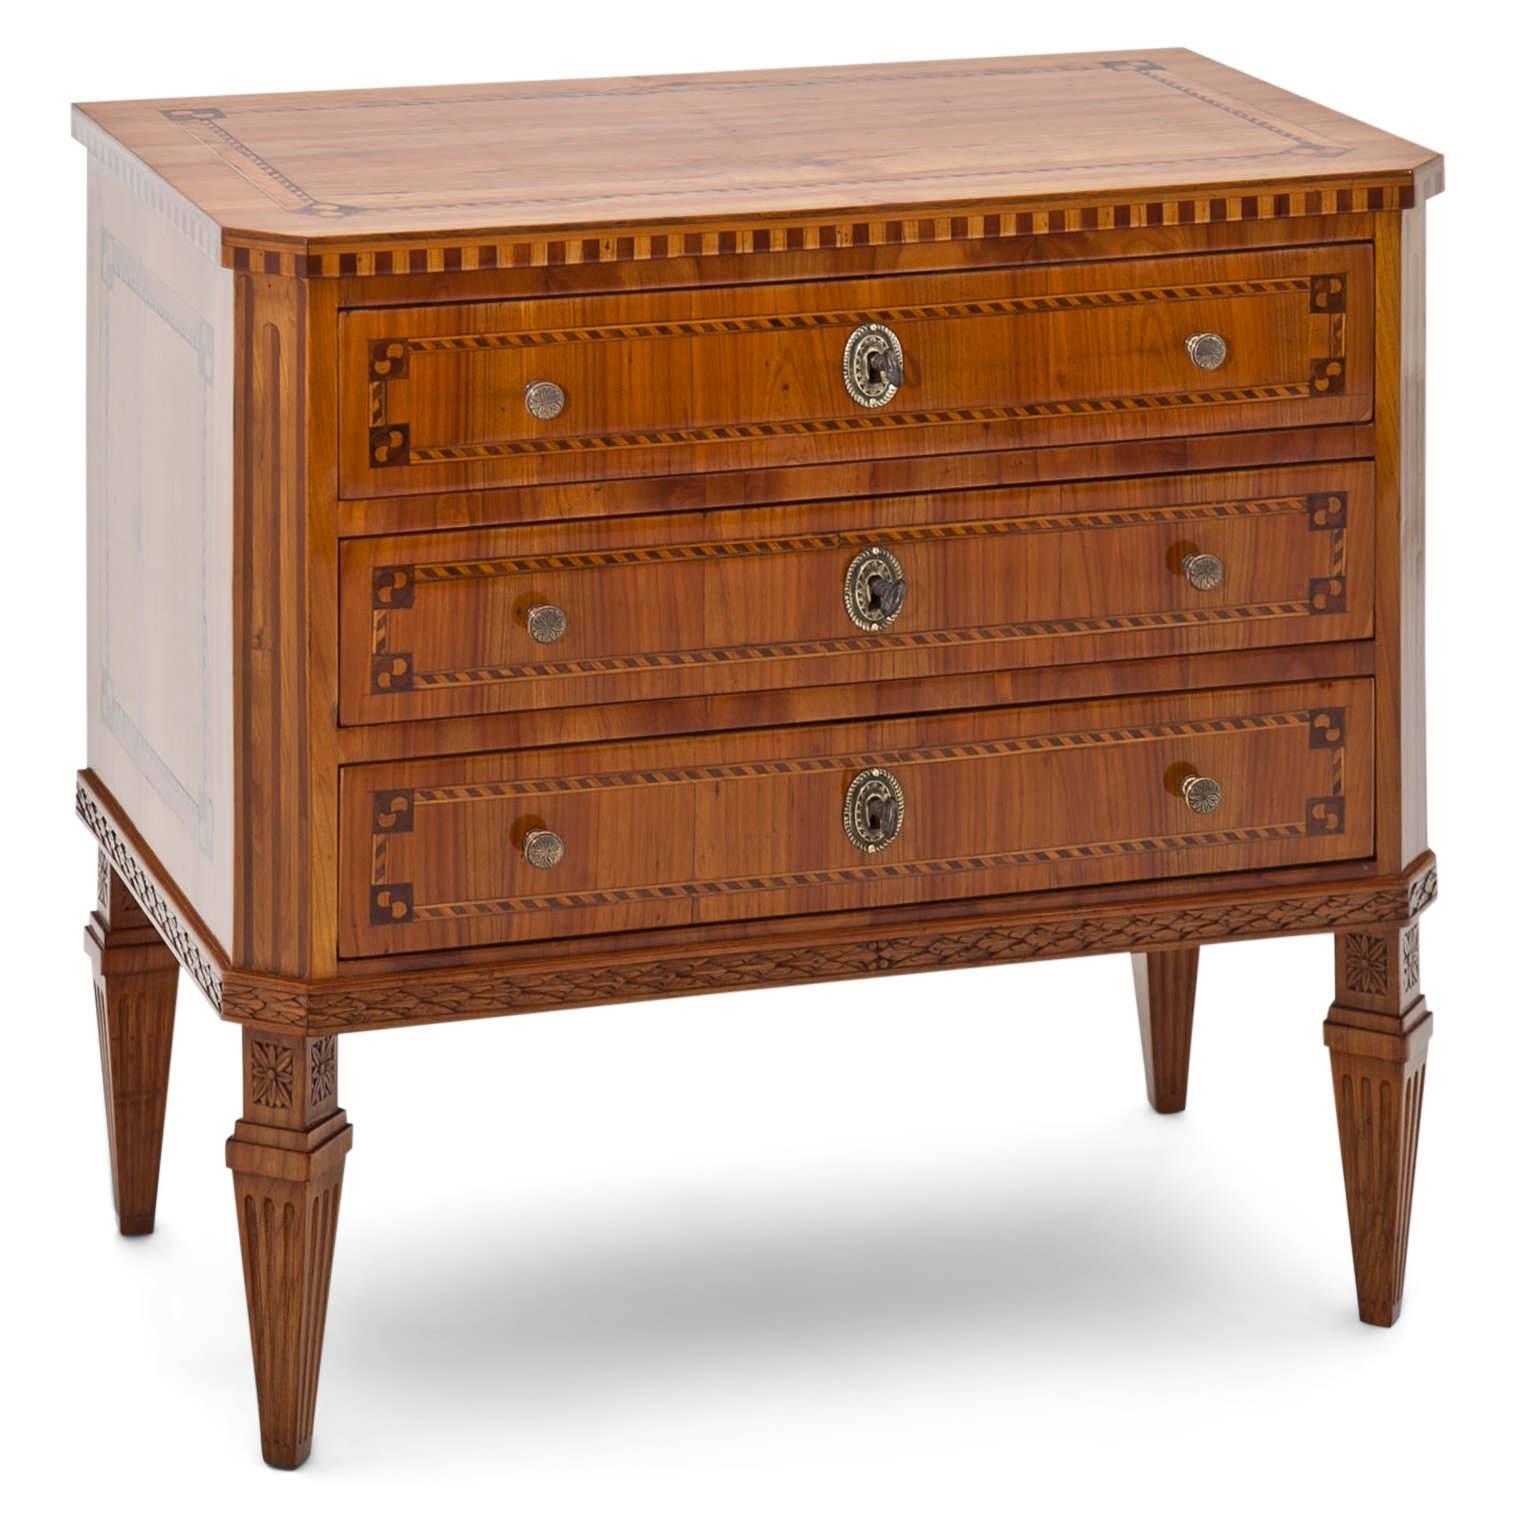 Three-drawered Louis Seize-style chest of drawers on fluted tapered feet with carved flower ornaments. The body with slanted edges and inlays on front, sides and on top. The fittings are new. This chest is a Louis Seize-style chest, designed under